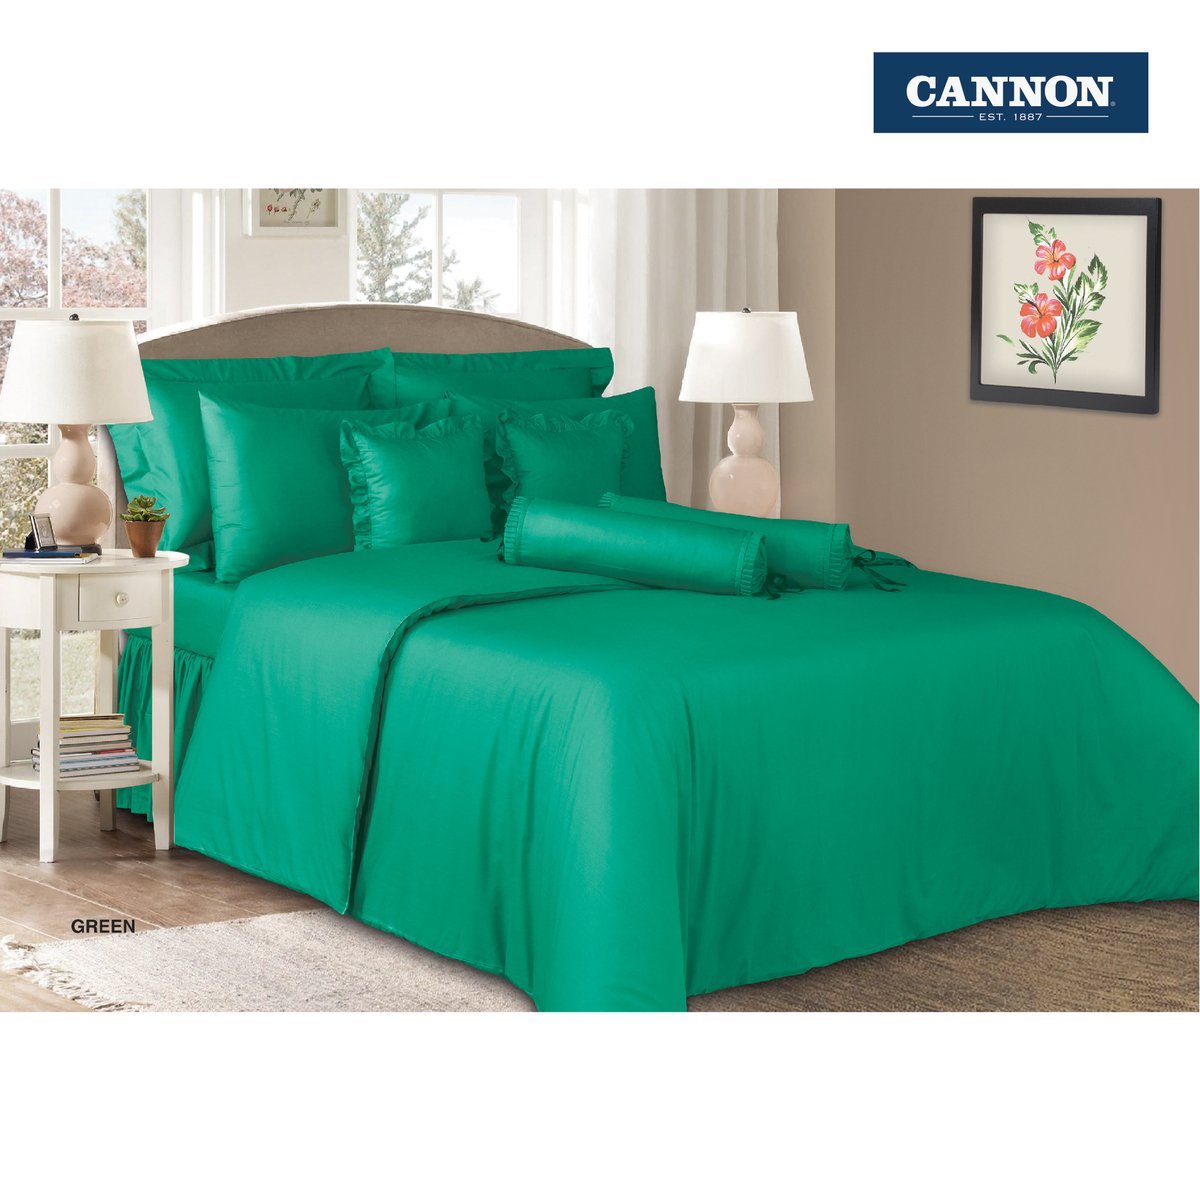 Cannon Fitted Sheet + Pillow Cover Plain Single Size 120x200cm Green